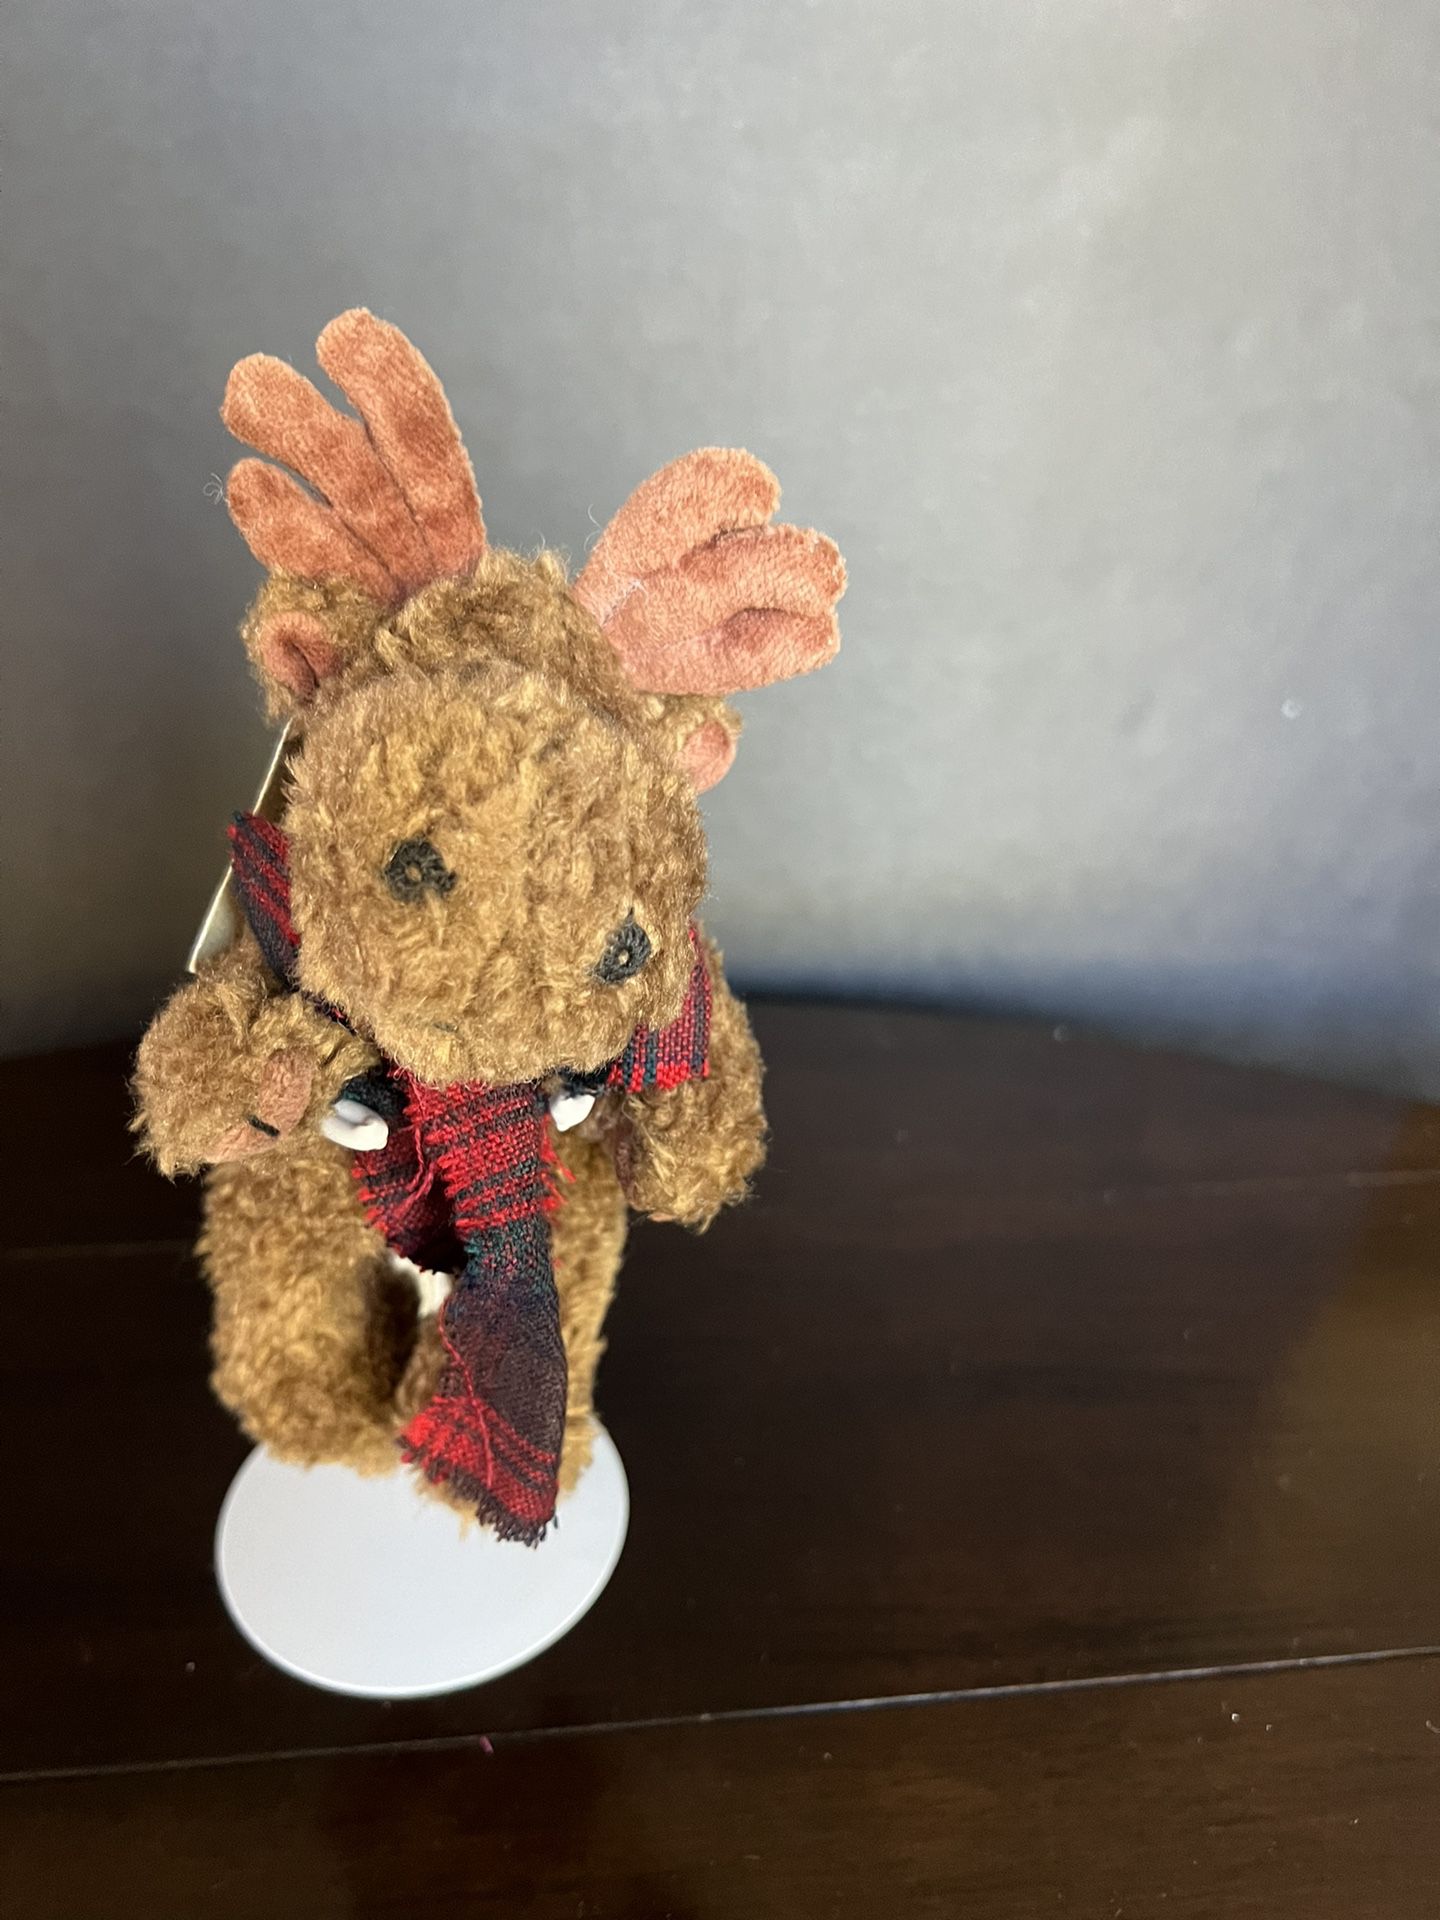  Boyds Bears "Mendel" Moose Plush 7" Red Plaid Scarf Jointed Stuffed Animal